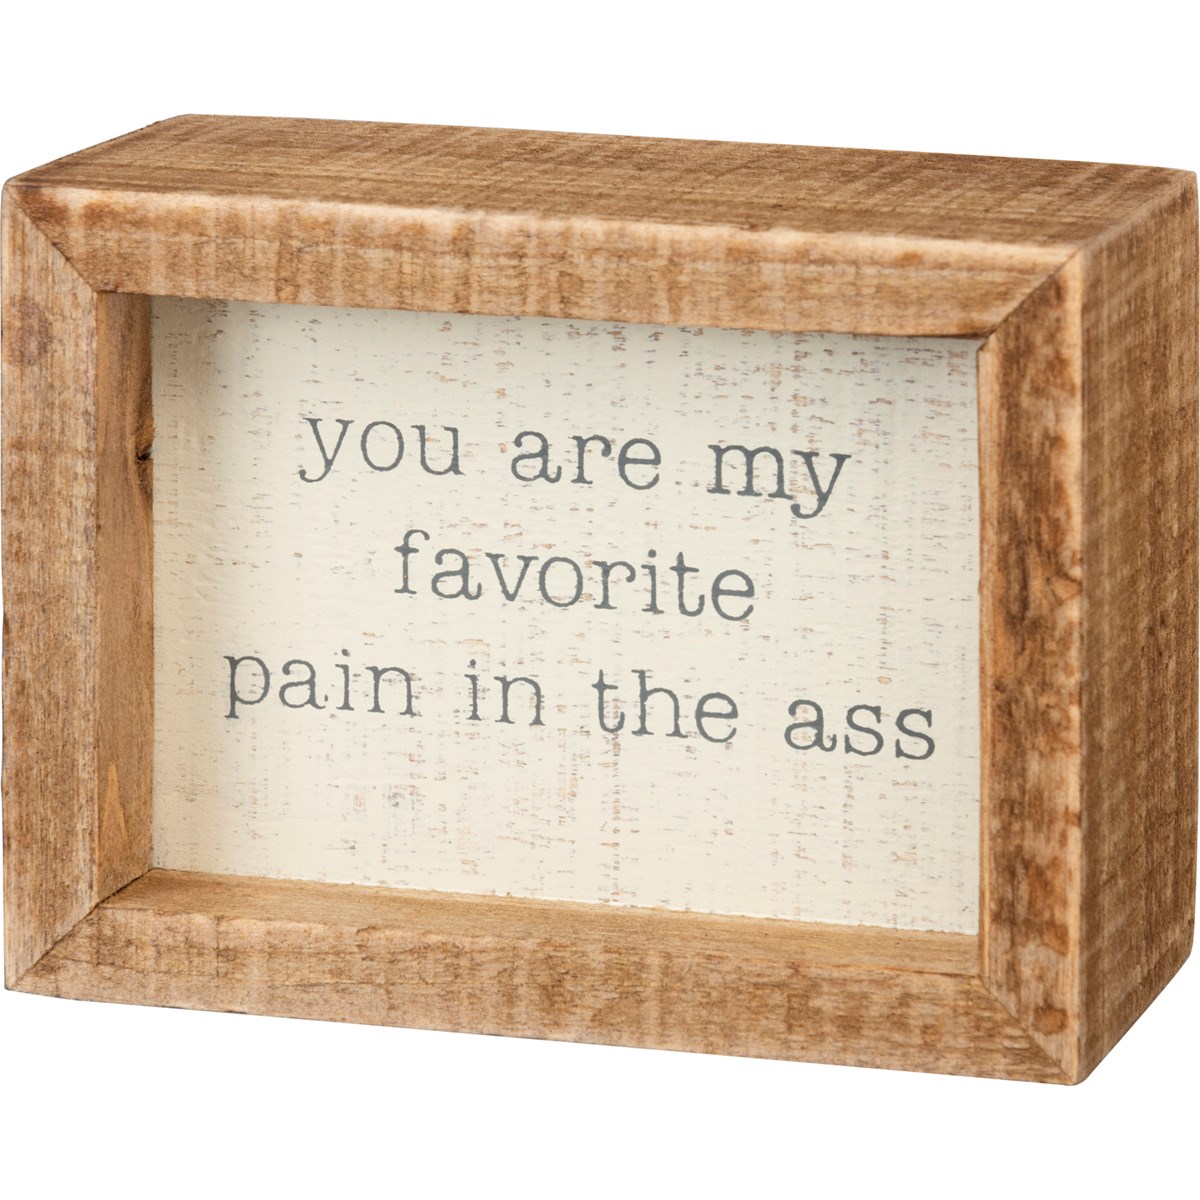 Inset Box Sign - You Are My Favorite - 4" x 3" x 1.75" - Wood